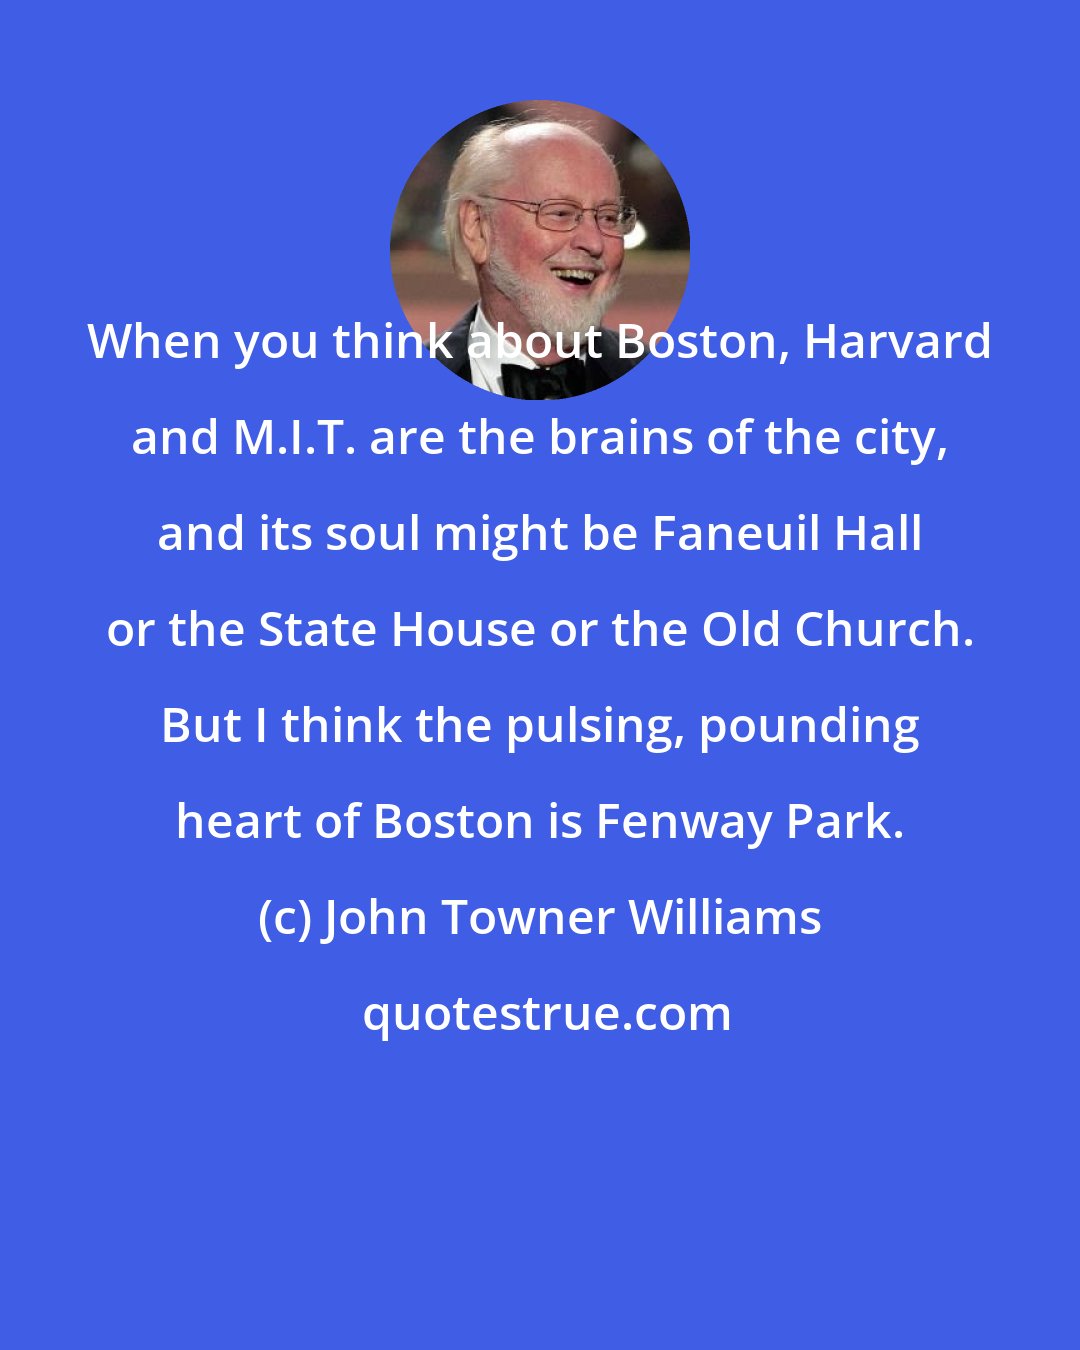 John Towner Williams: When you think about Boston, Harvard and M.I.T. are the brains of the city, and its soul might be Faneuil Hall or the State House or the Old Church. But I think the pulsing, pounding heart of Boston is Fenway Park.